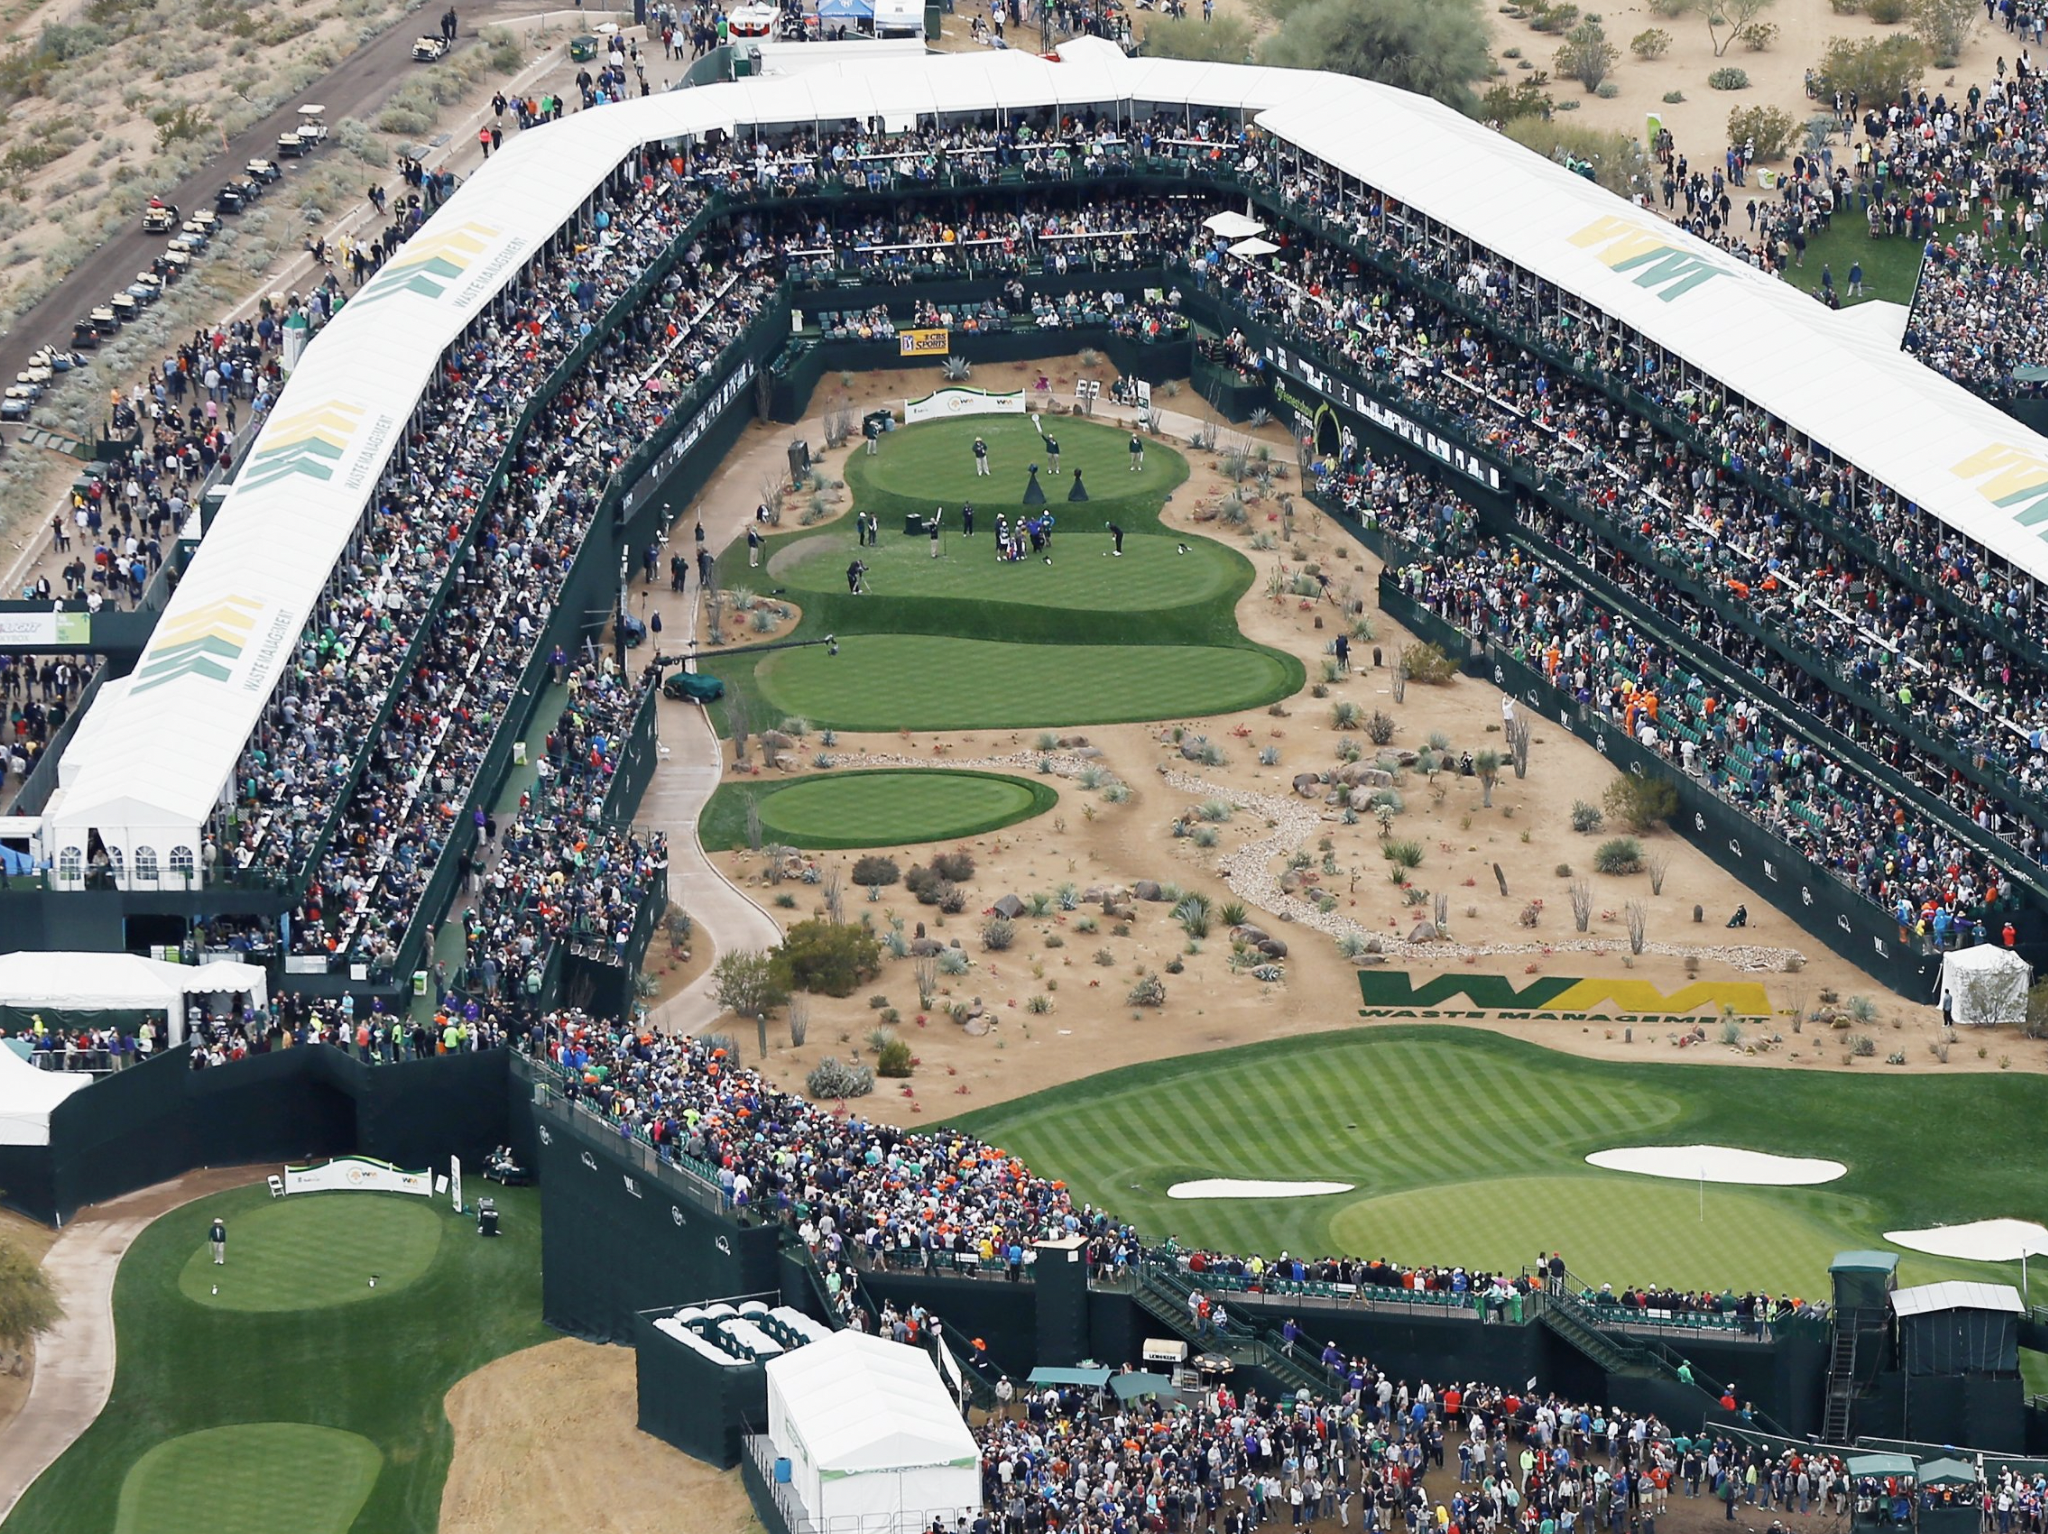 PGA Tours revamped coverage for 2022 promises a lot more live golf